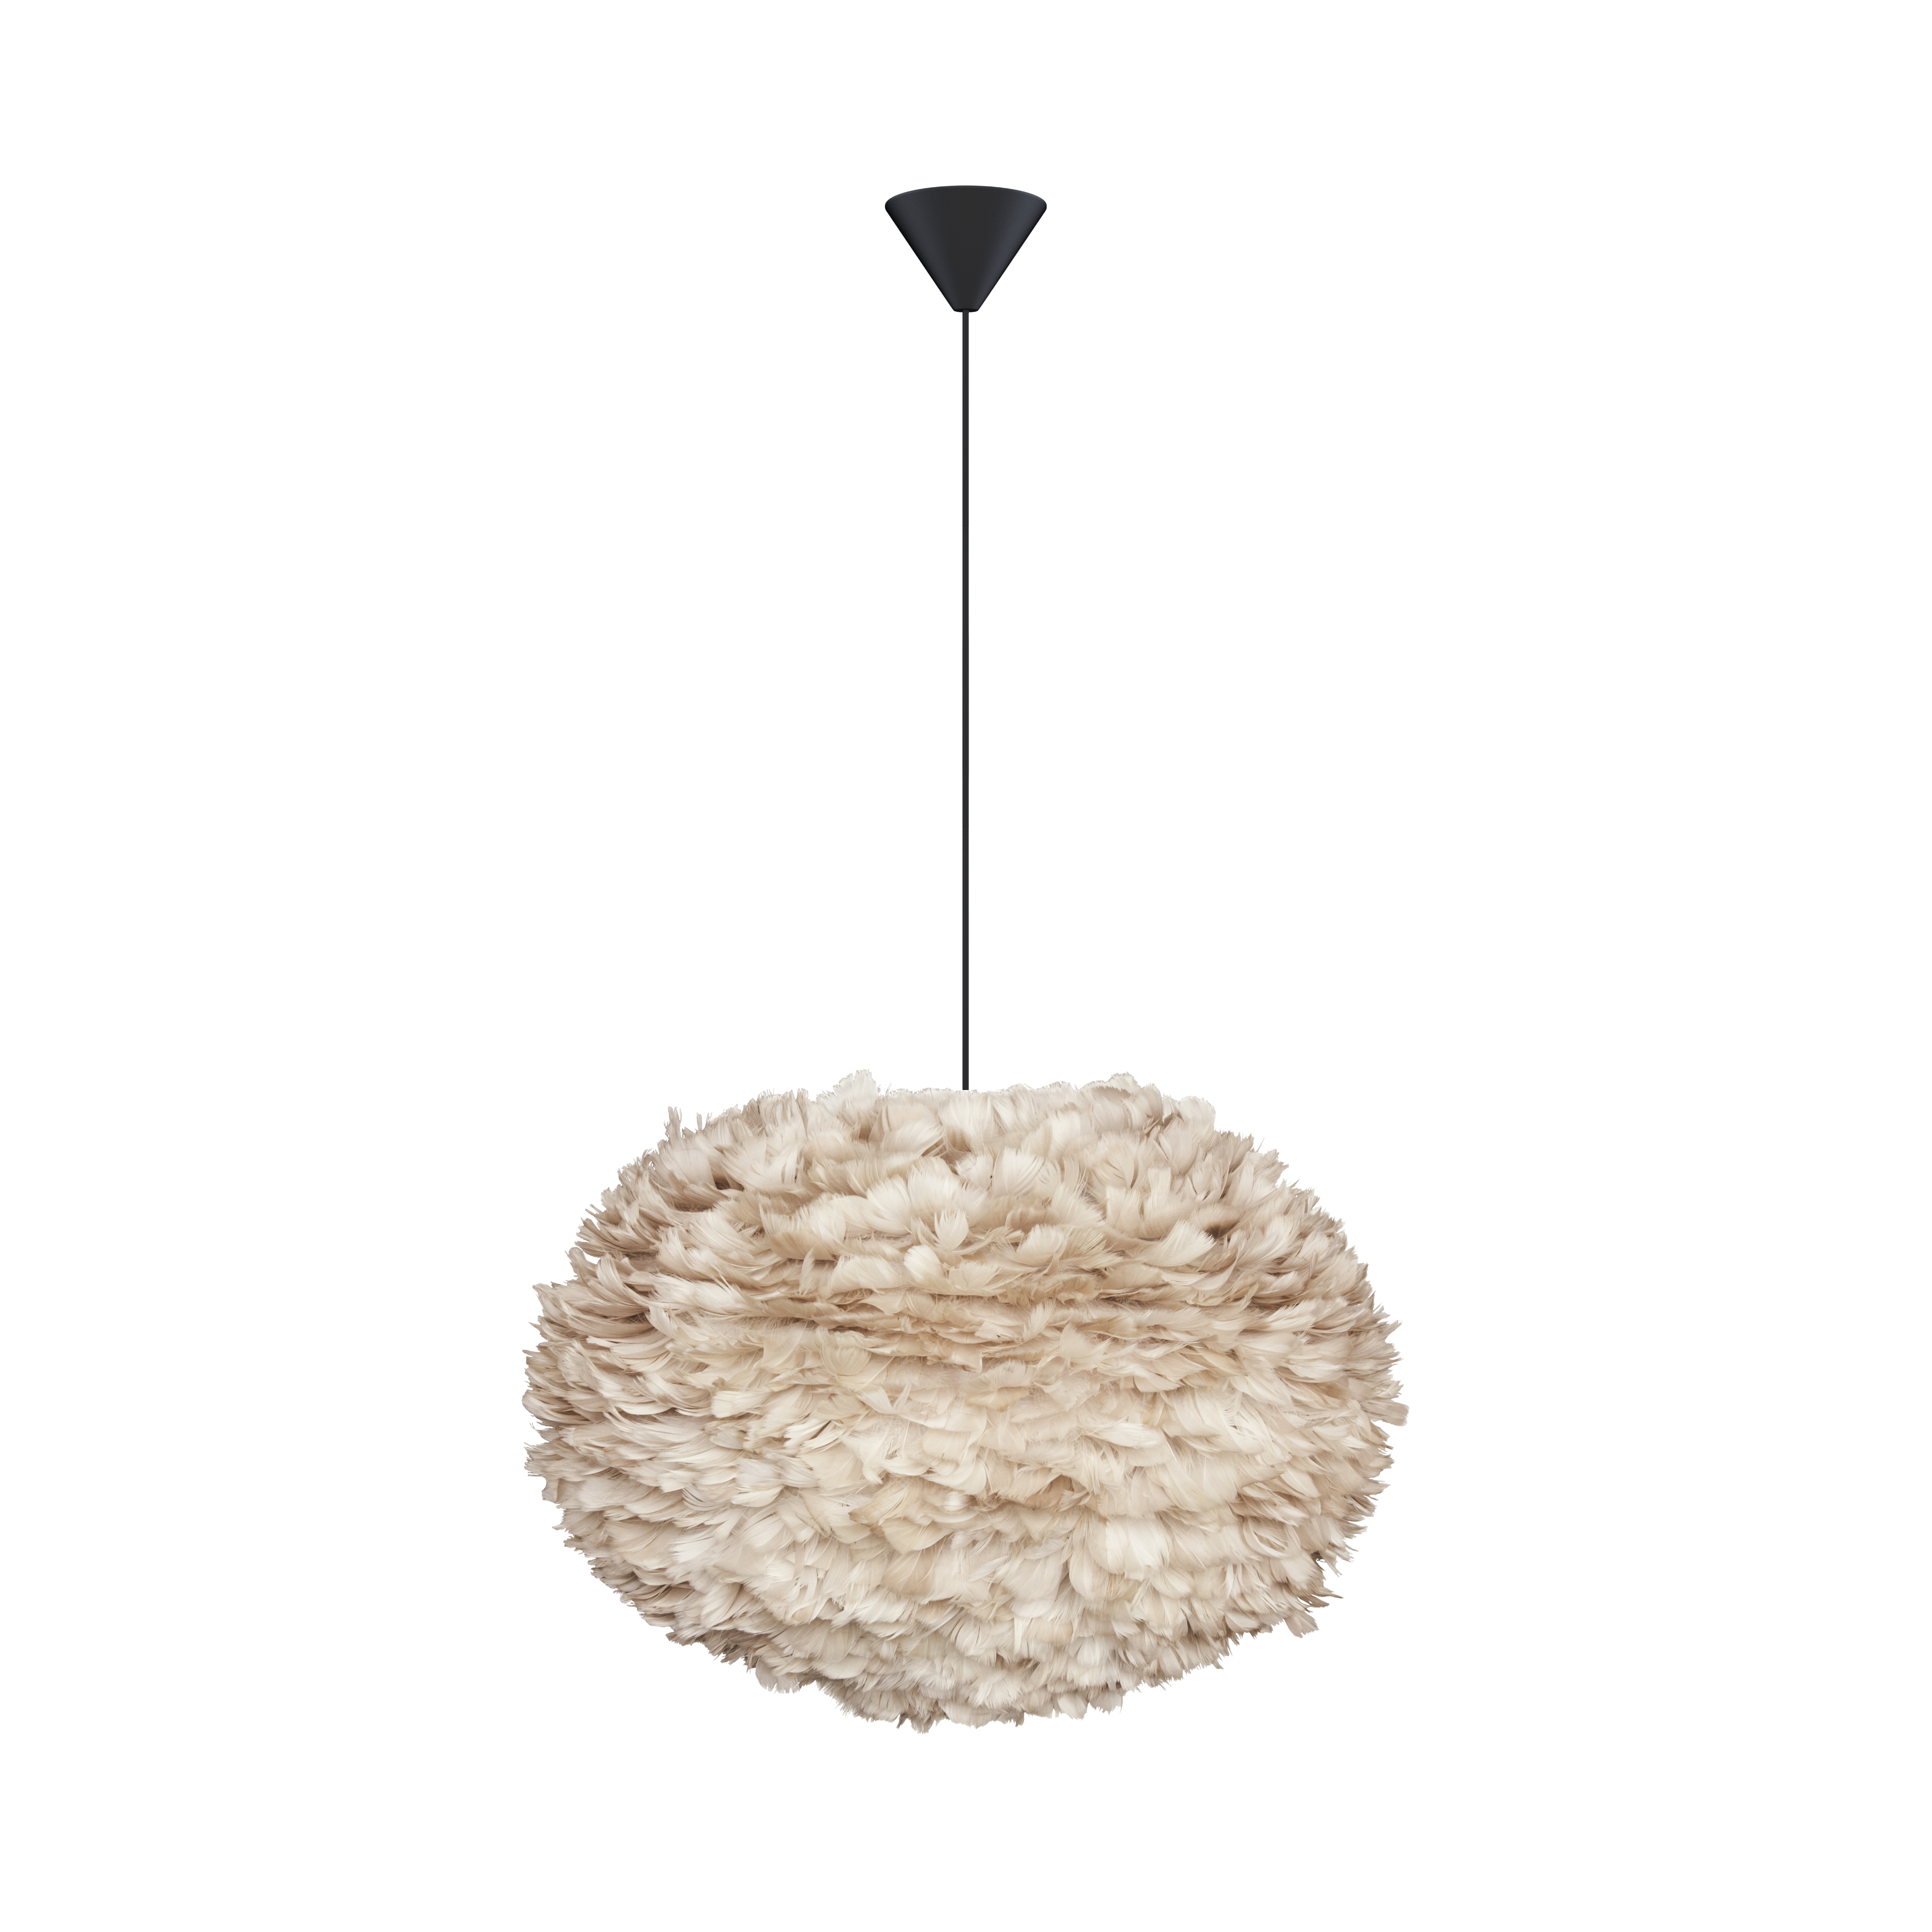 UMAGE Large Light Brown Feather Eos Pendant Shade with Black Cord Set